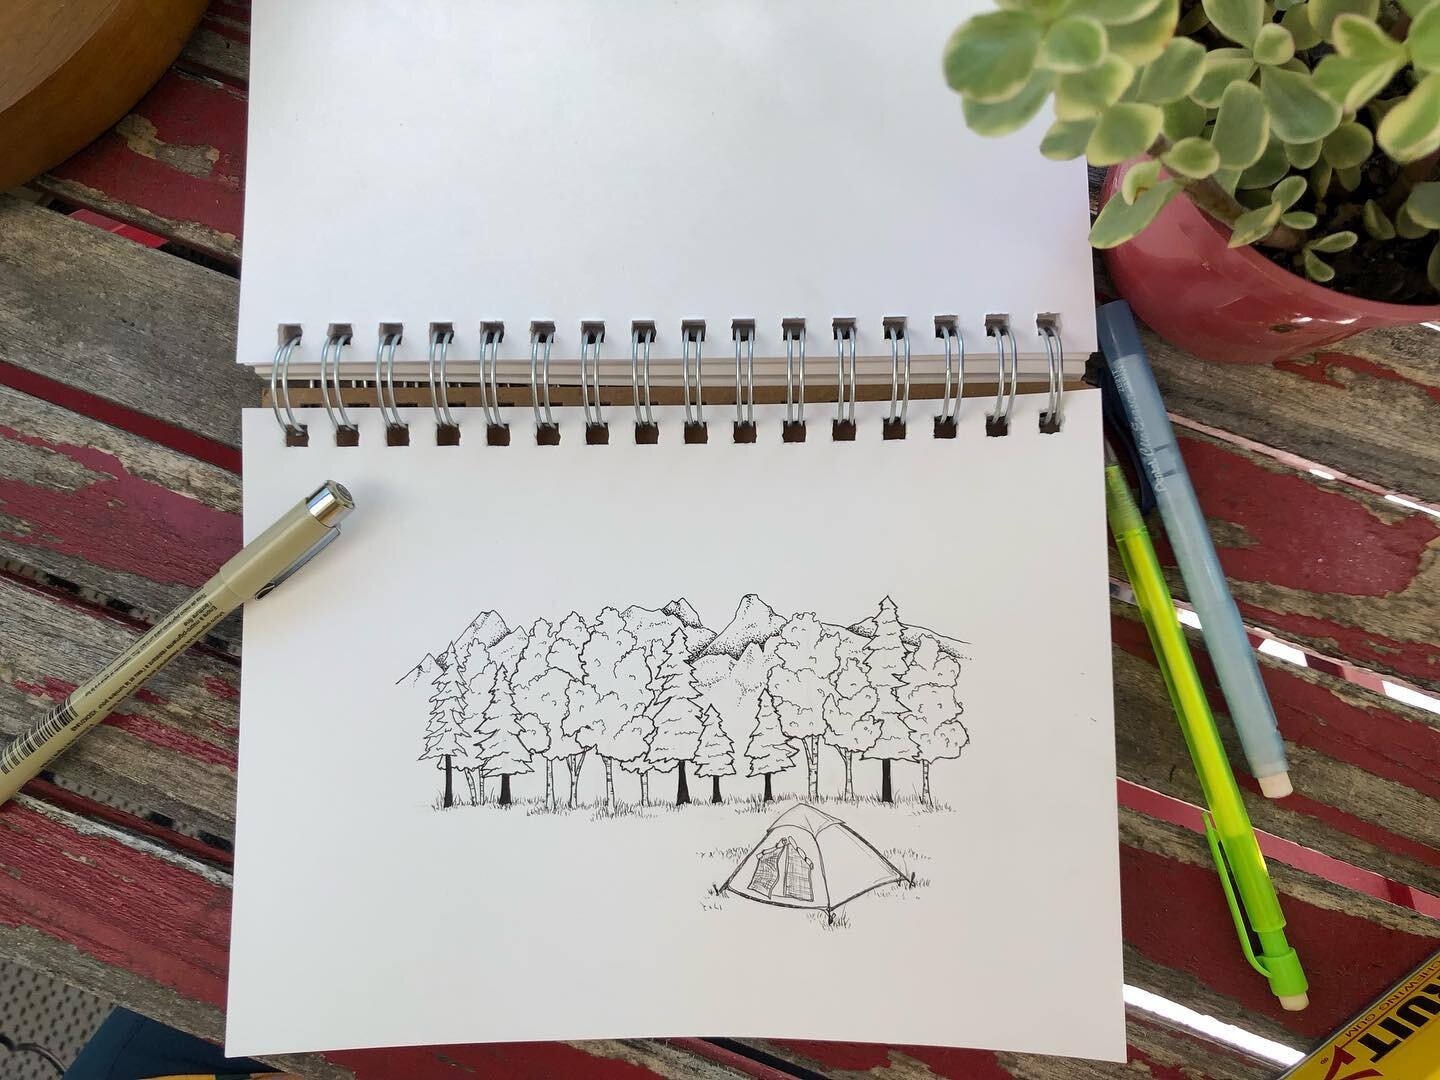 Camping 🏕 seems to be the popular vote so I have been enjoying the sunshine and drawing tents!
.
.
.

#adventureworthy #outdoorwoman #naturewoman #naturevibes #lovingnature #hikingirls&nbsp; #campinglovers⛺️ #bestlifever #happyliving #sleepingoutsid